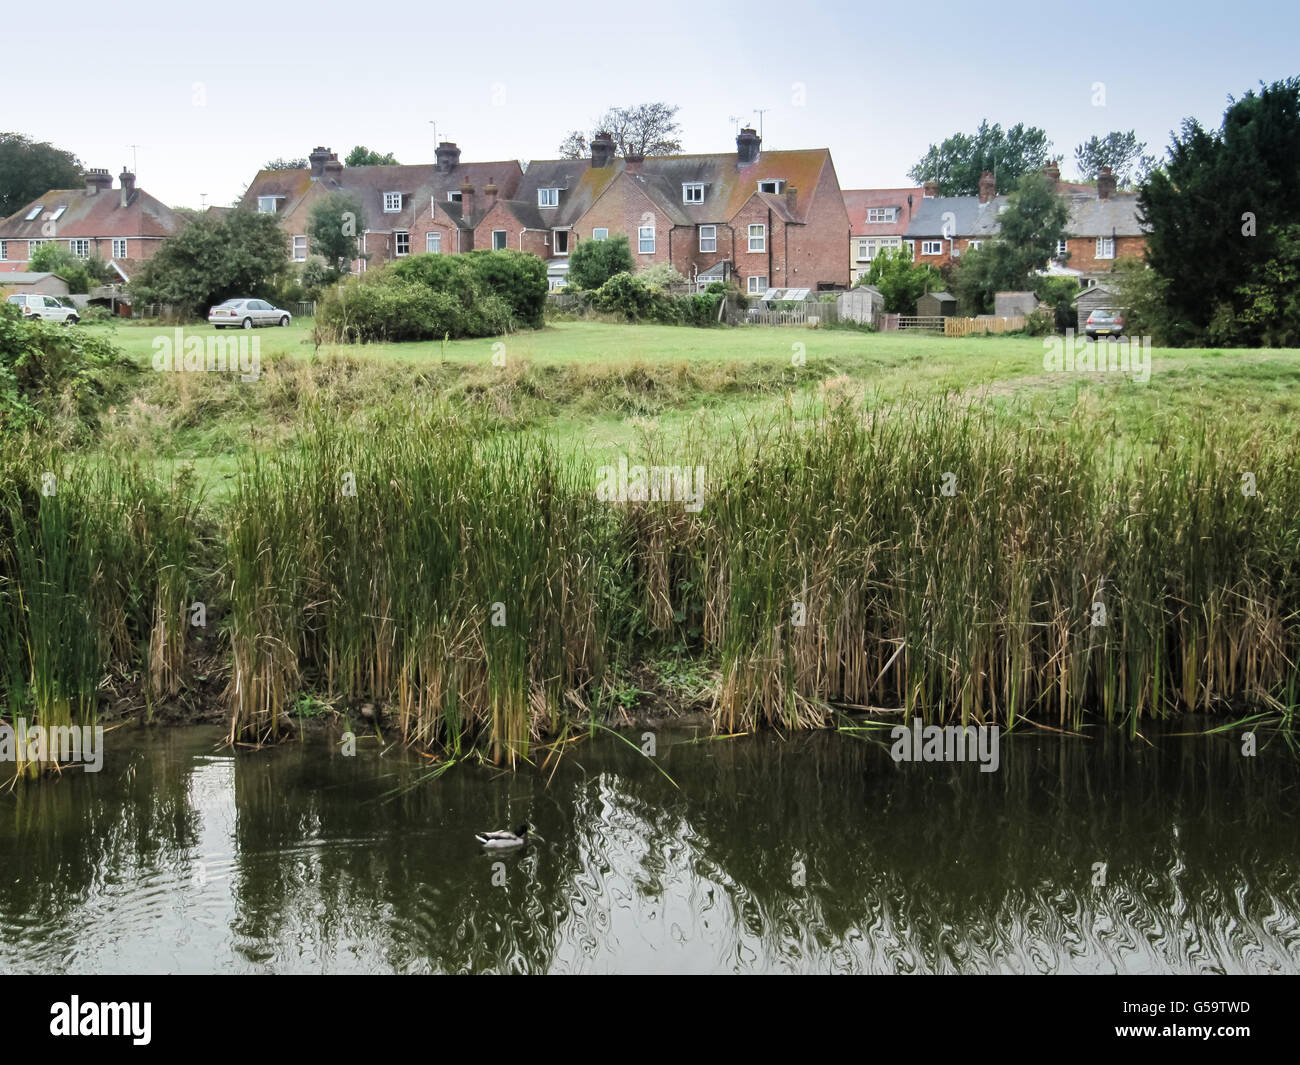 Ditch and houses in Rye, East Sussex, England, United Kingdom Stock Photo